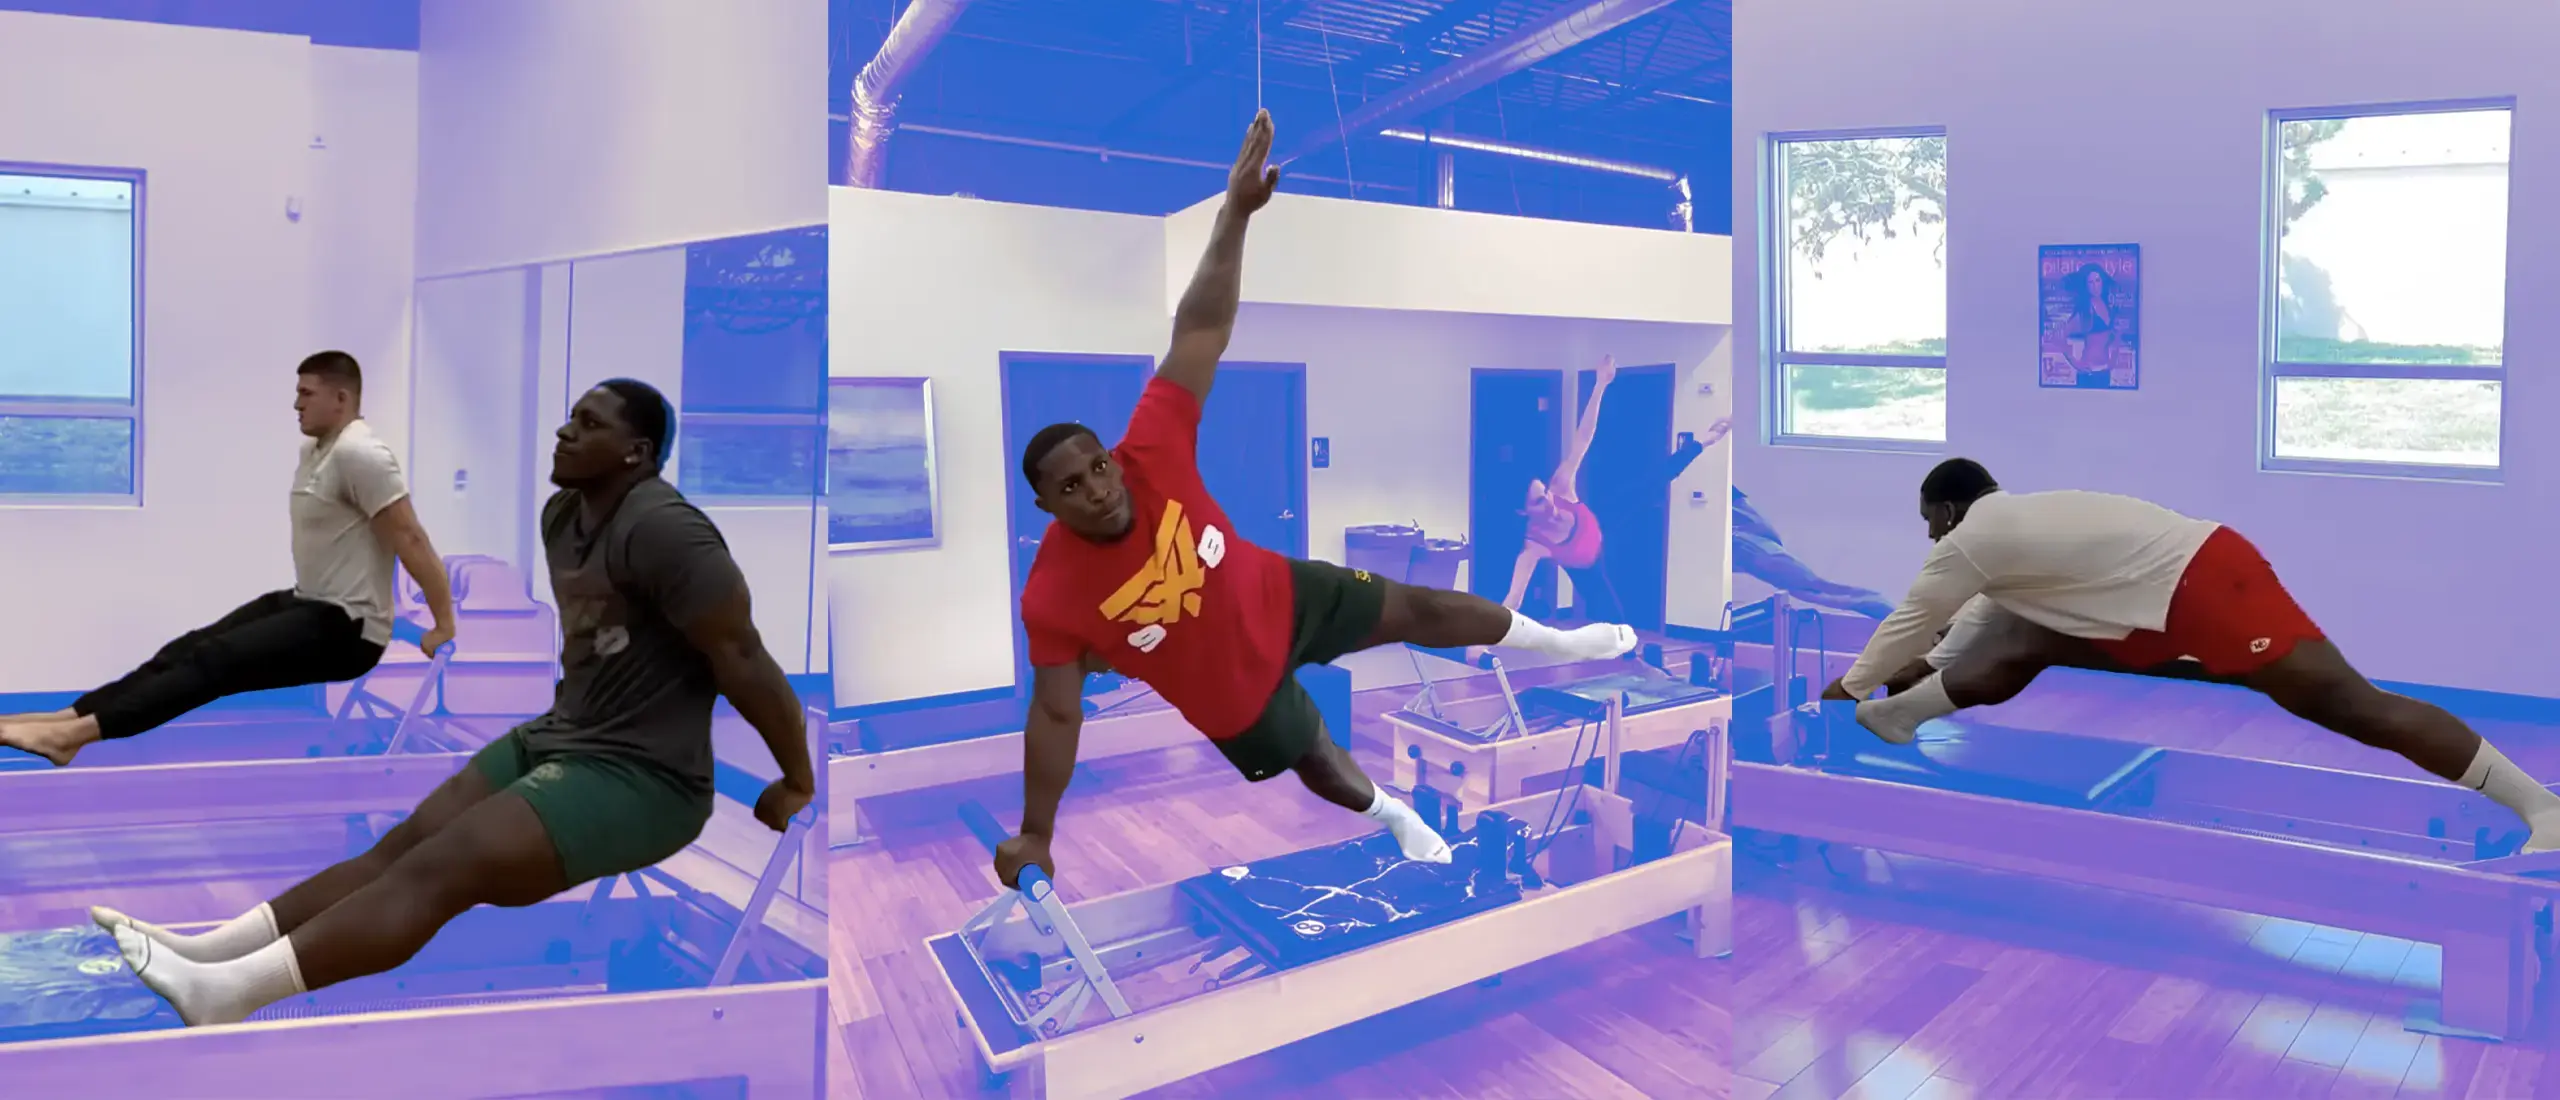 Can the Kansas City Chiefs' Super Bowl Win Be Credited to Pilates?